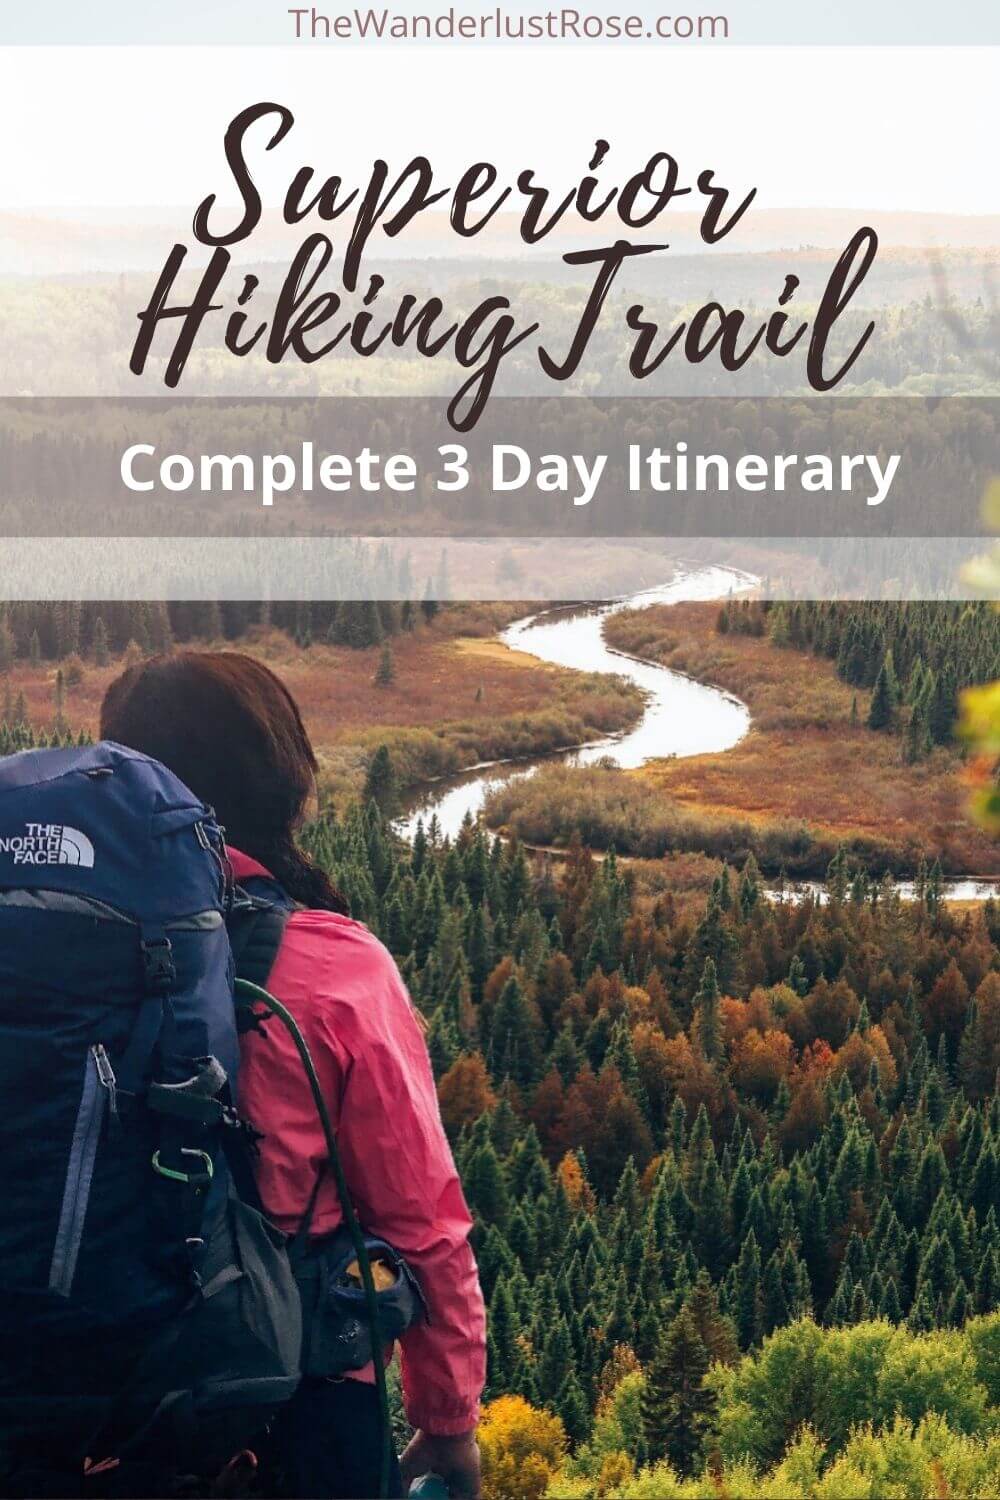 Superior Hiking Trail: 3 Day Itinerary - The Wanderlust Rose